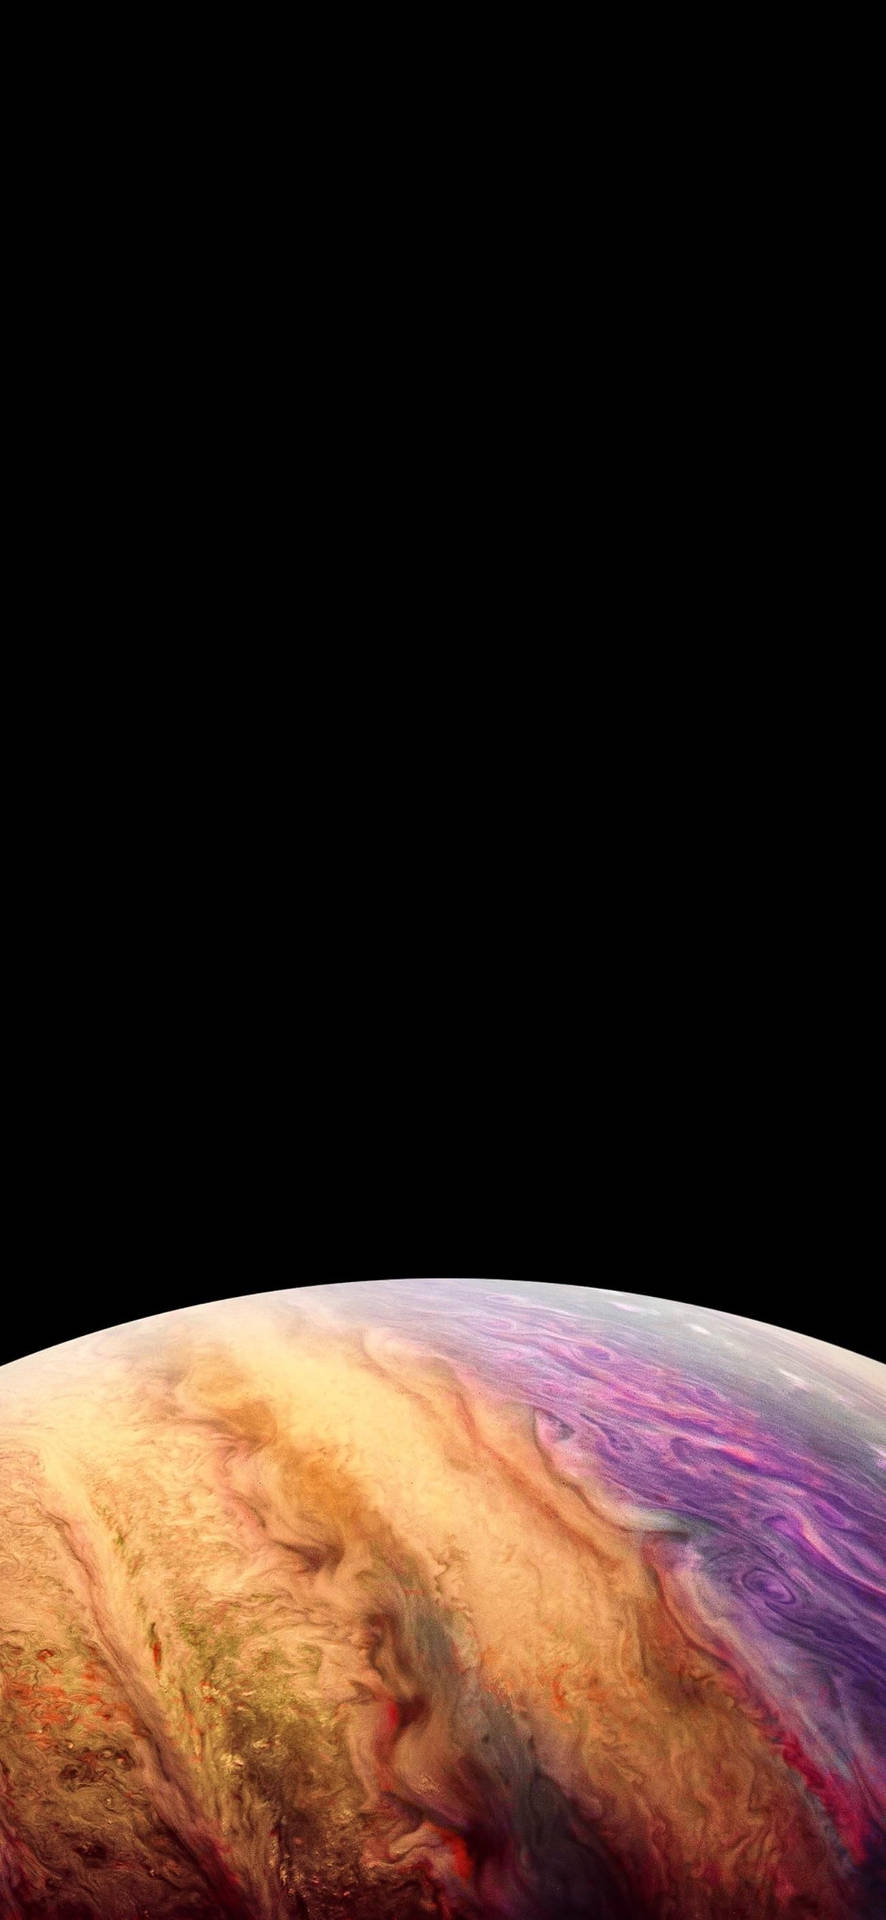 A Planet With A Colorful Surface Wallpaper